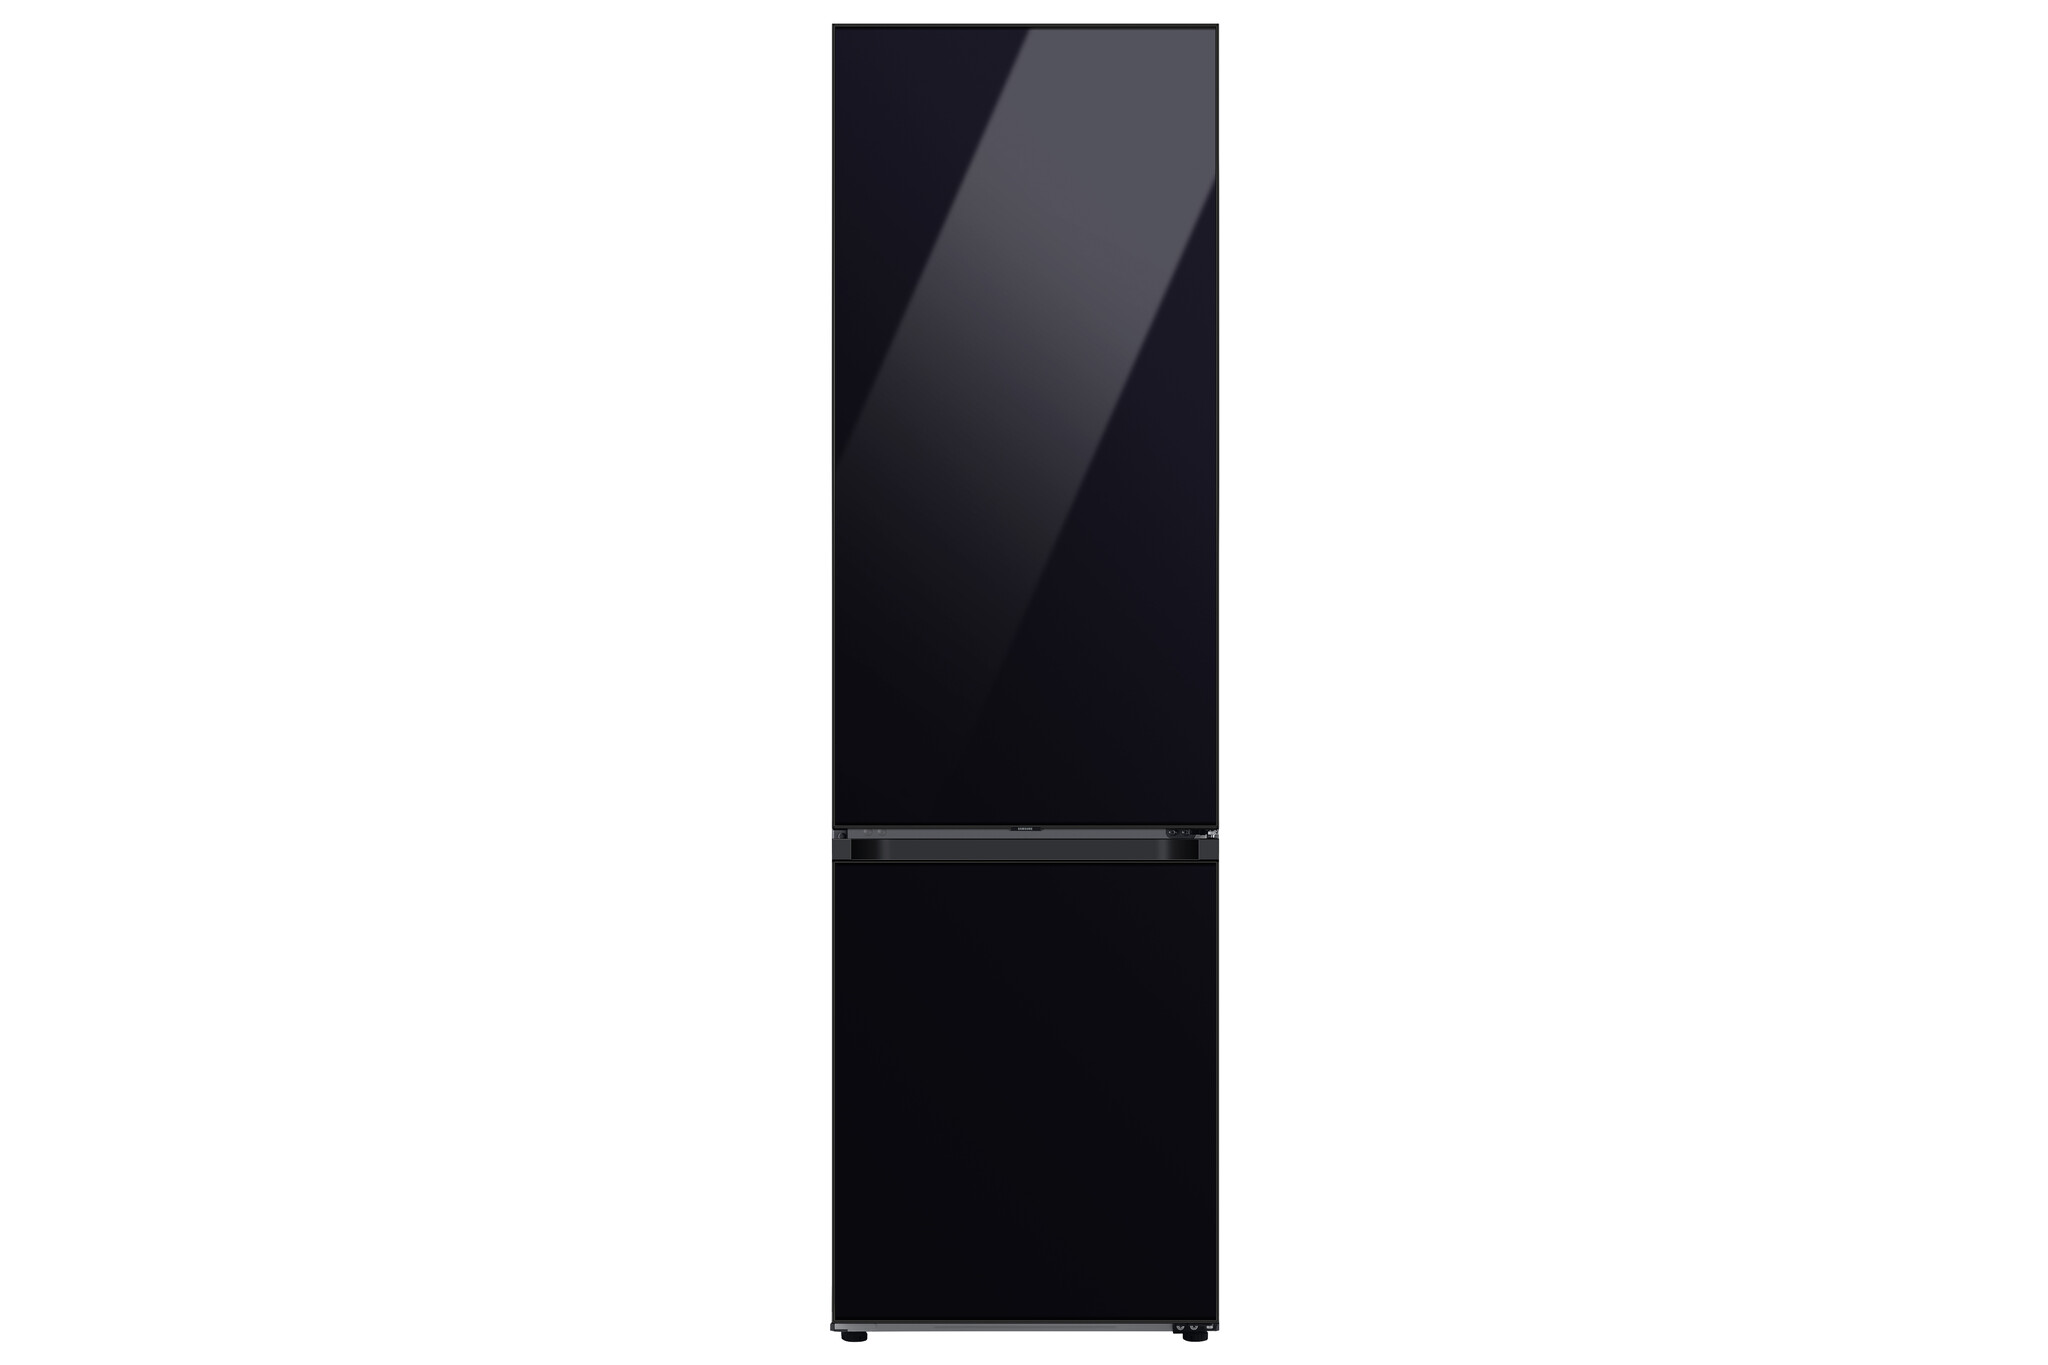 Samsung Bespoke Series 8 RB38C7B5C22 Wifi Connected Total No Frost Fridge Freezer – Clean Black – C Rated #365097